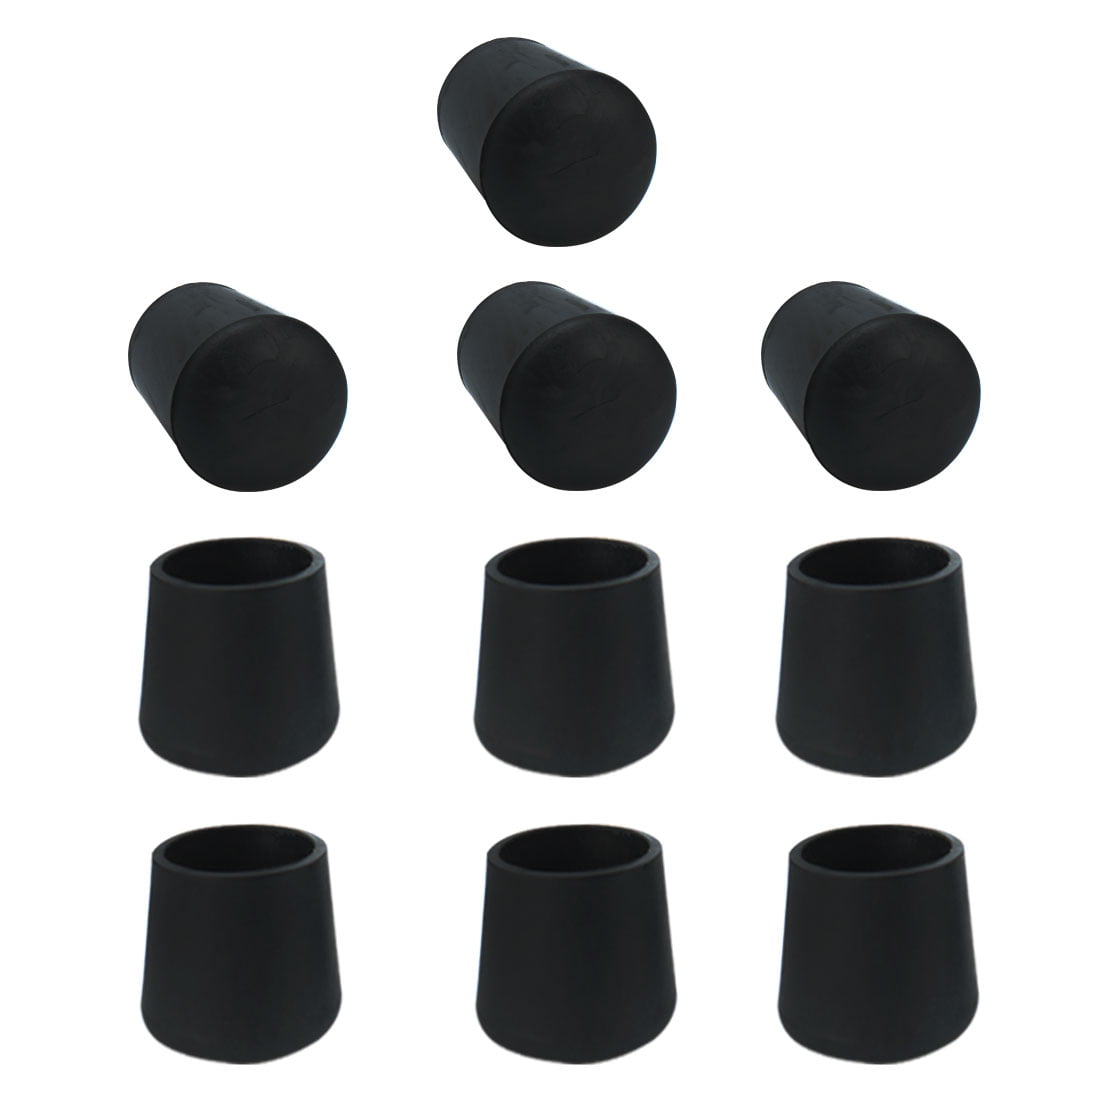 uxcell 30mm Dia Black PVC Rubber Round Cabinet Leg Insert Cover Protector